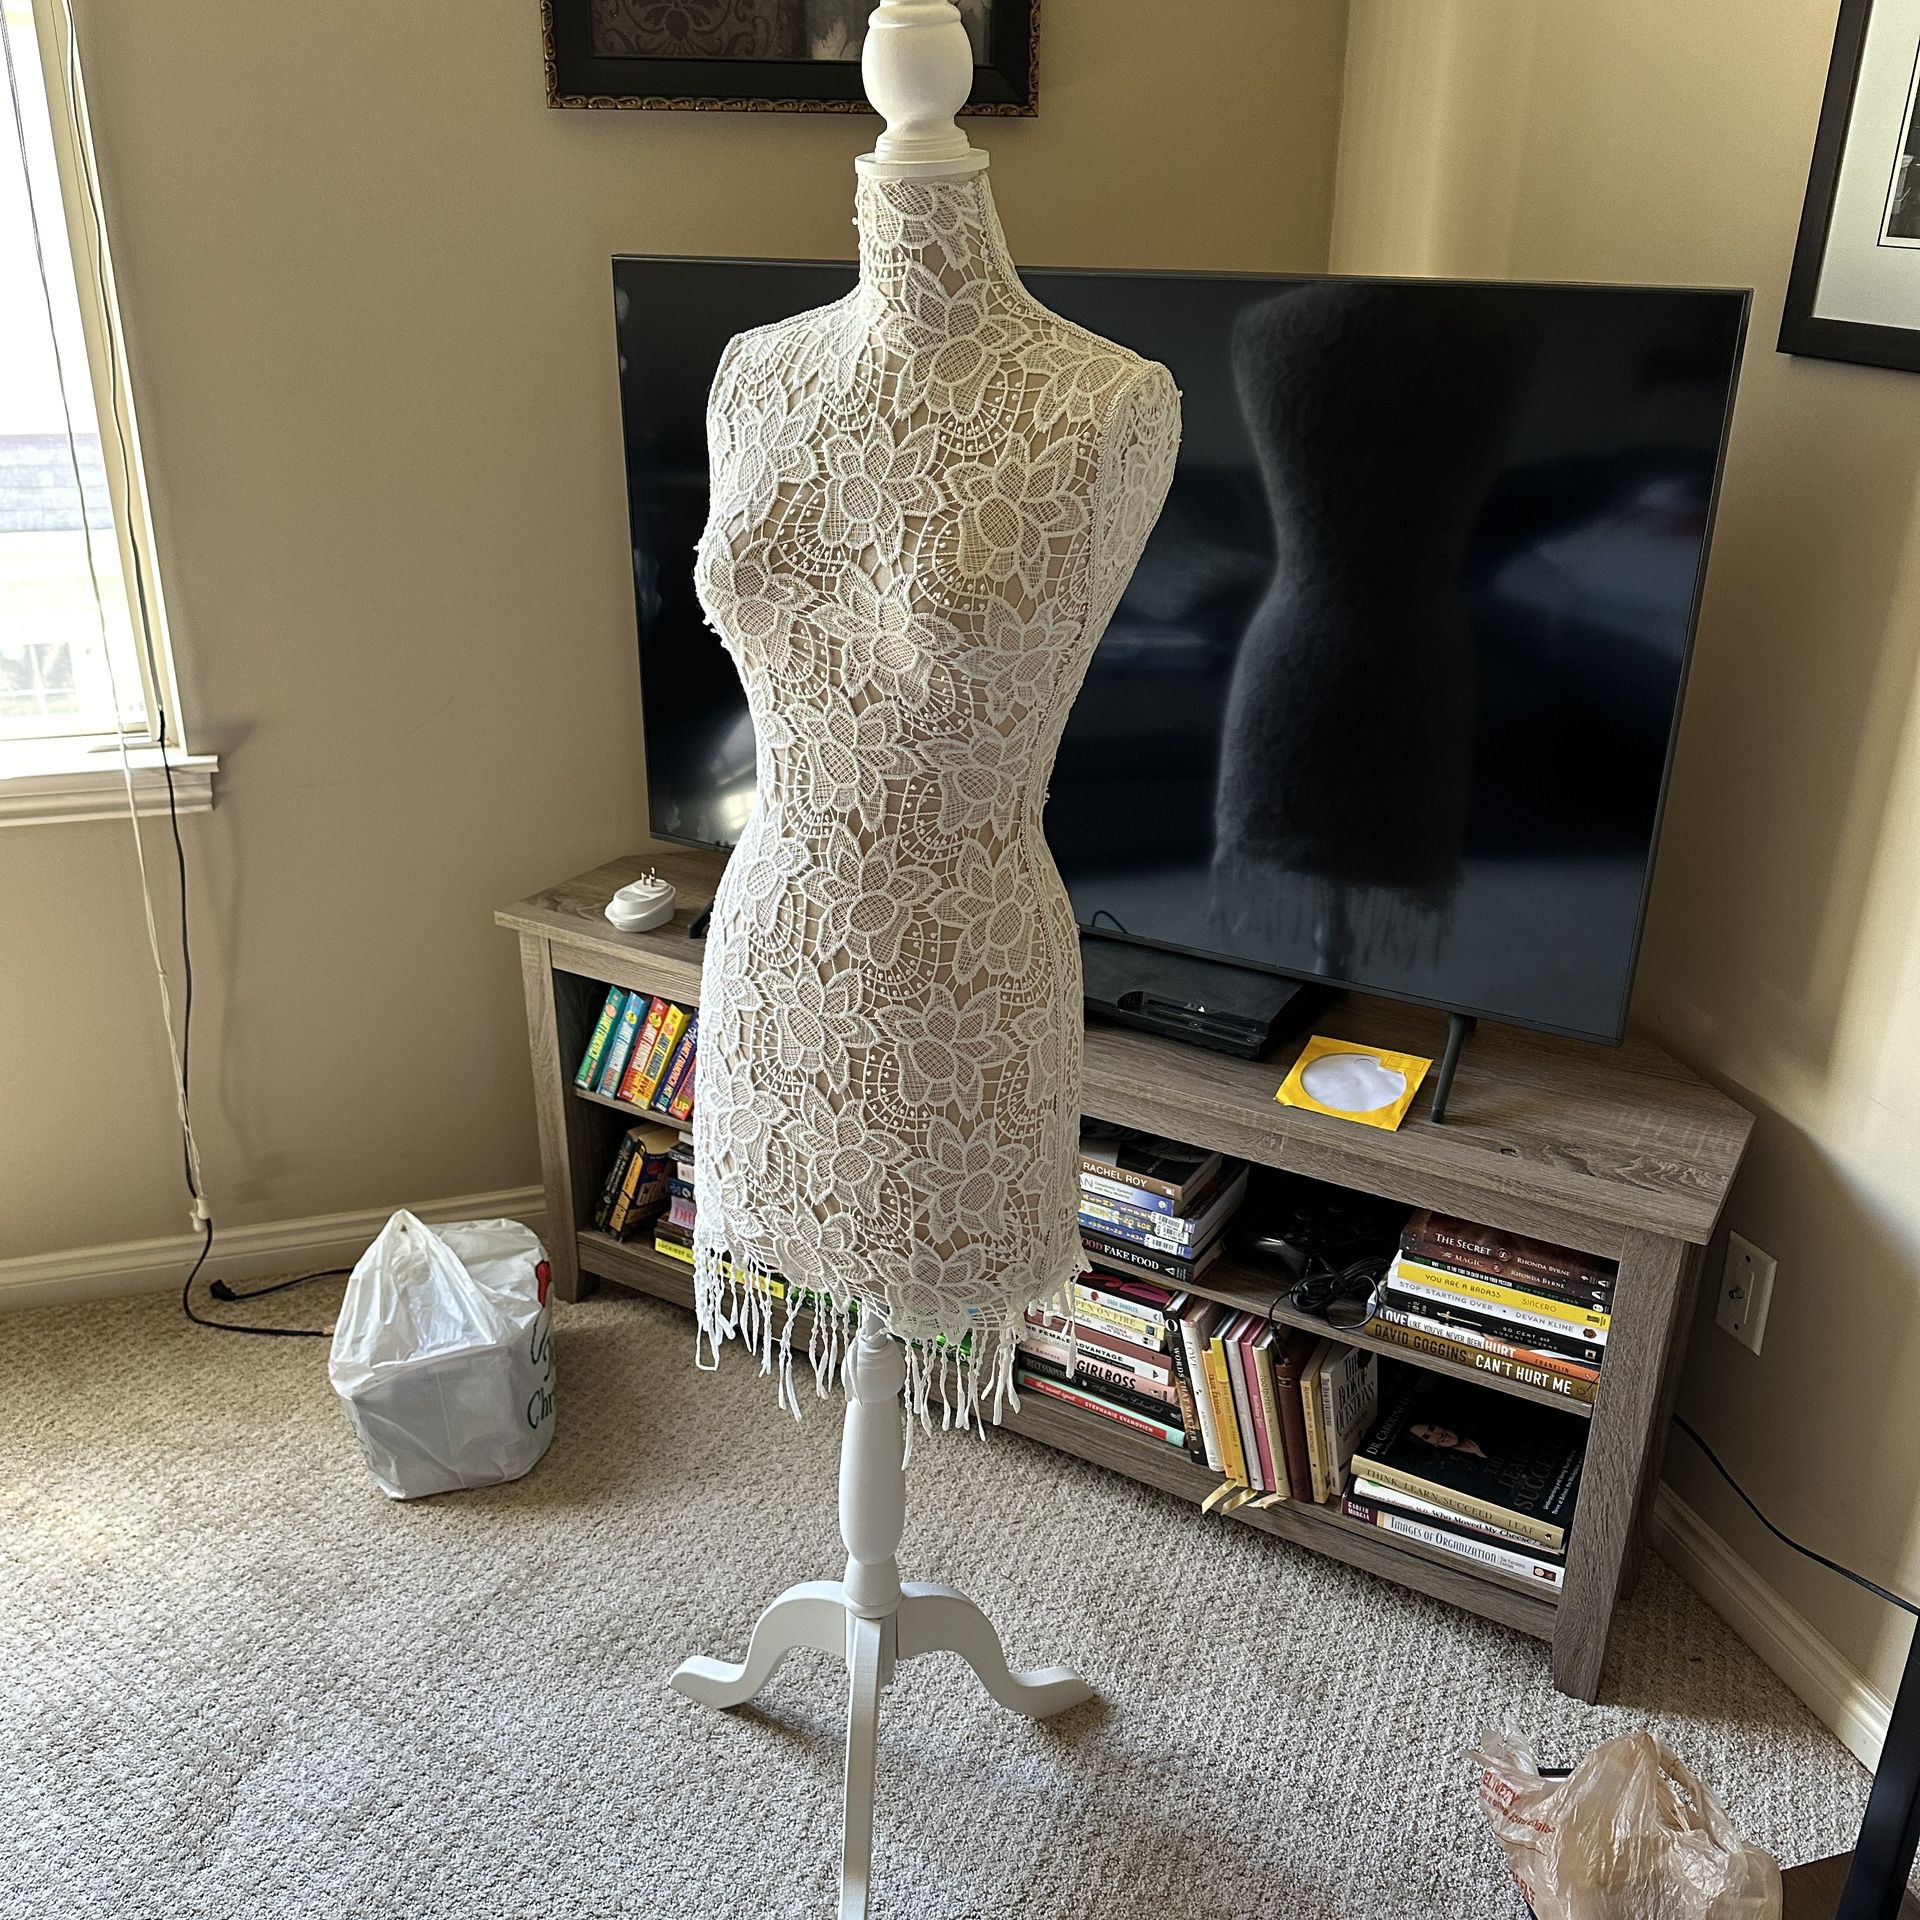 Clothes Mannequin NEW - Will Delete Listing When Sold